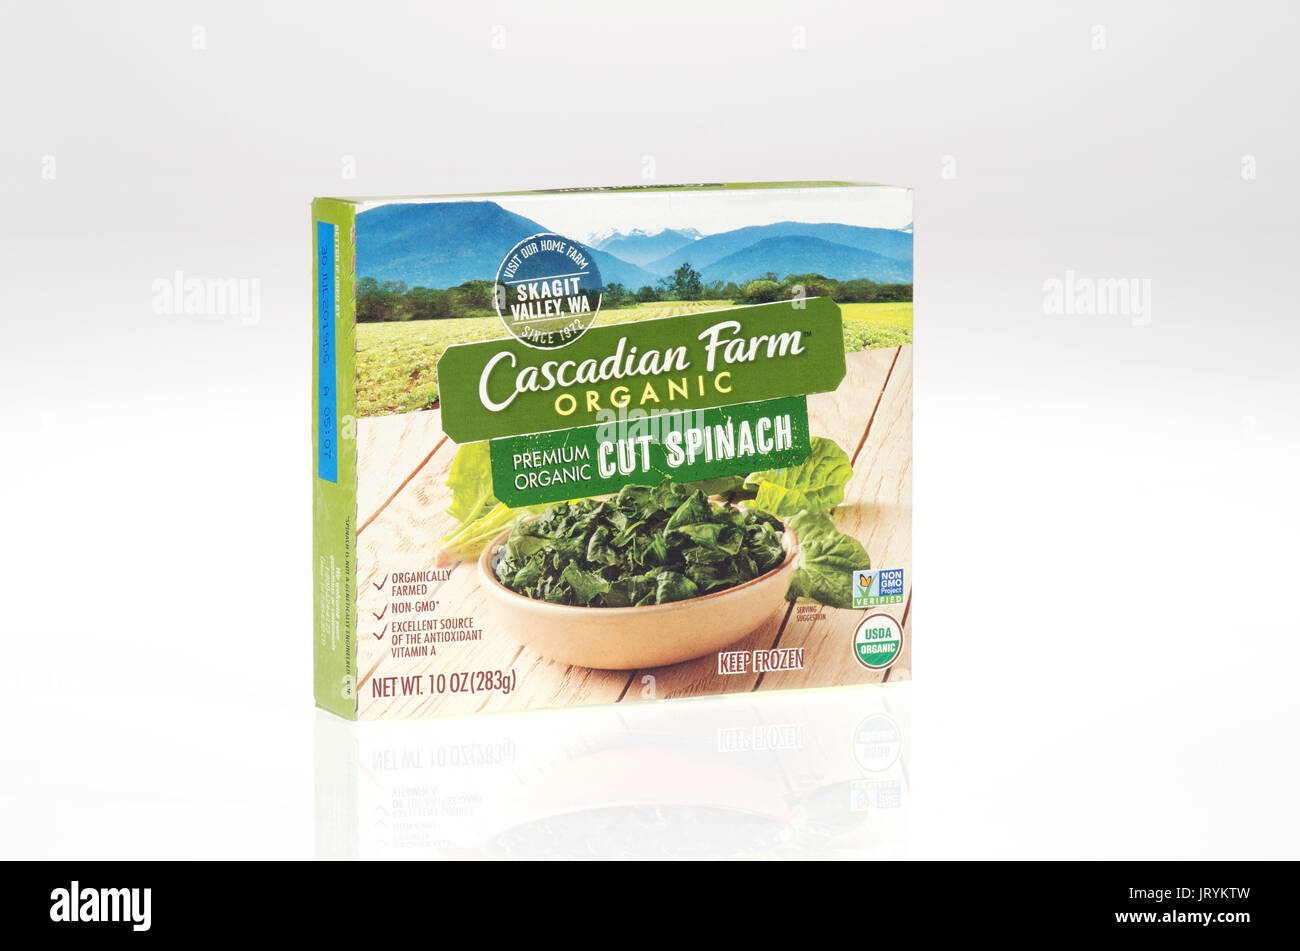 Box of unopened Cascadian Farms Organic Frozen Cut Spinach on white background. USA Stock Photo